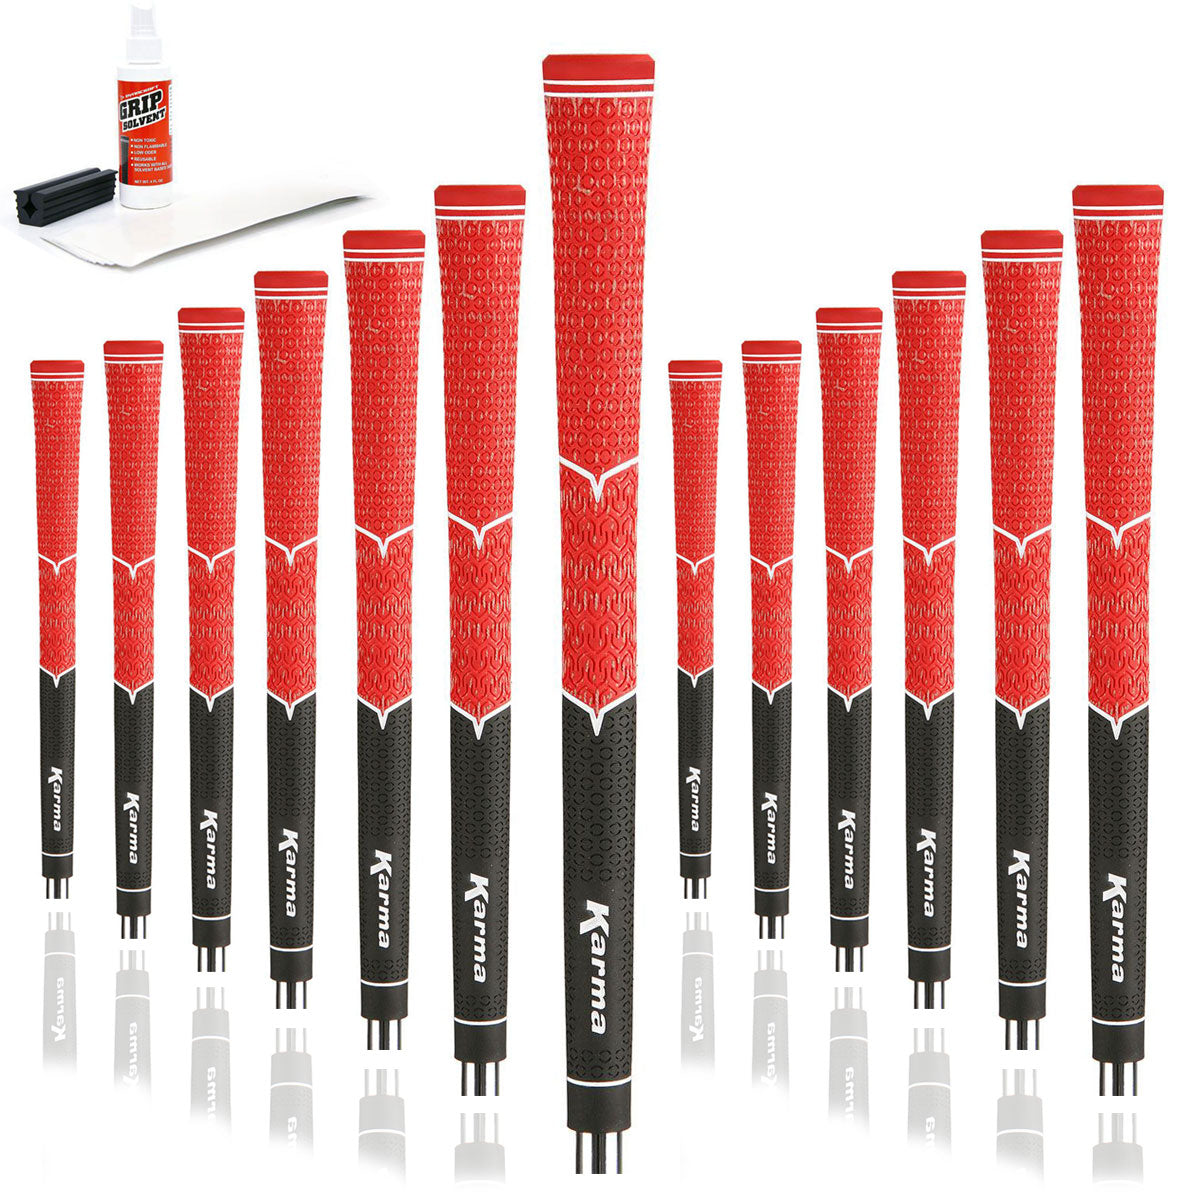 13 Karma V-Cord Black/Red golf grips, golf grip tape strips, bottle of grip solvent and rubber shaft clamp